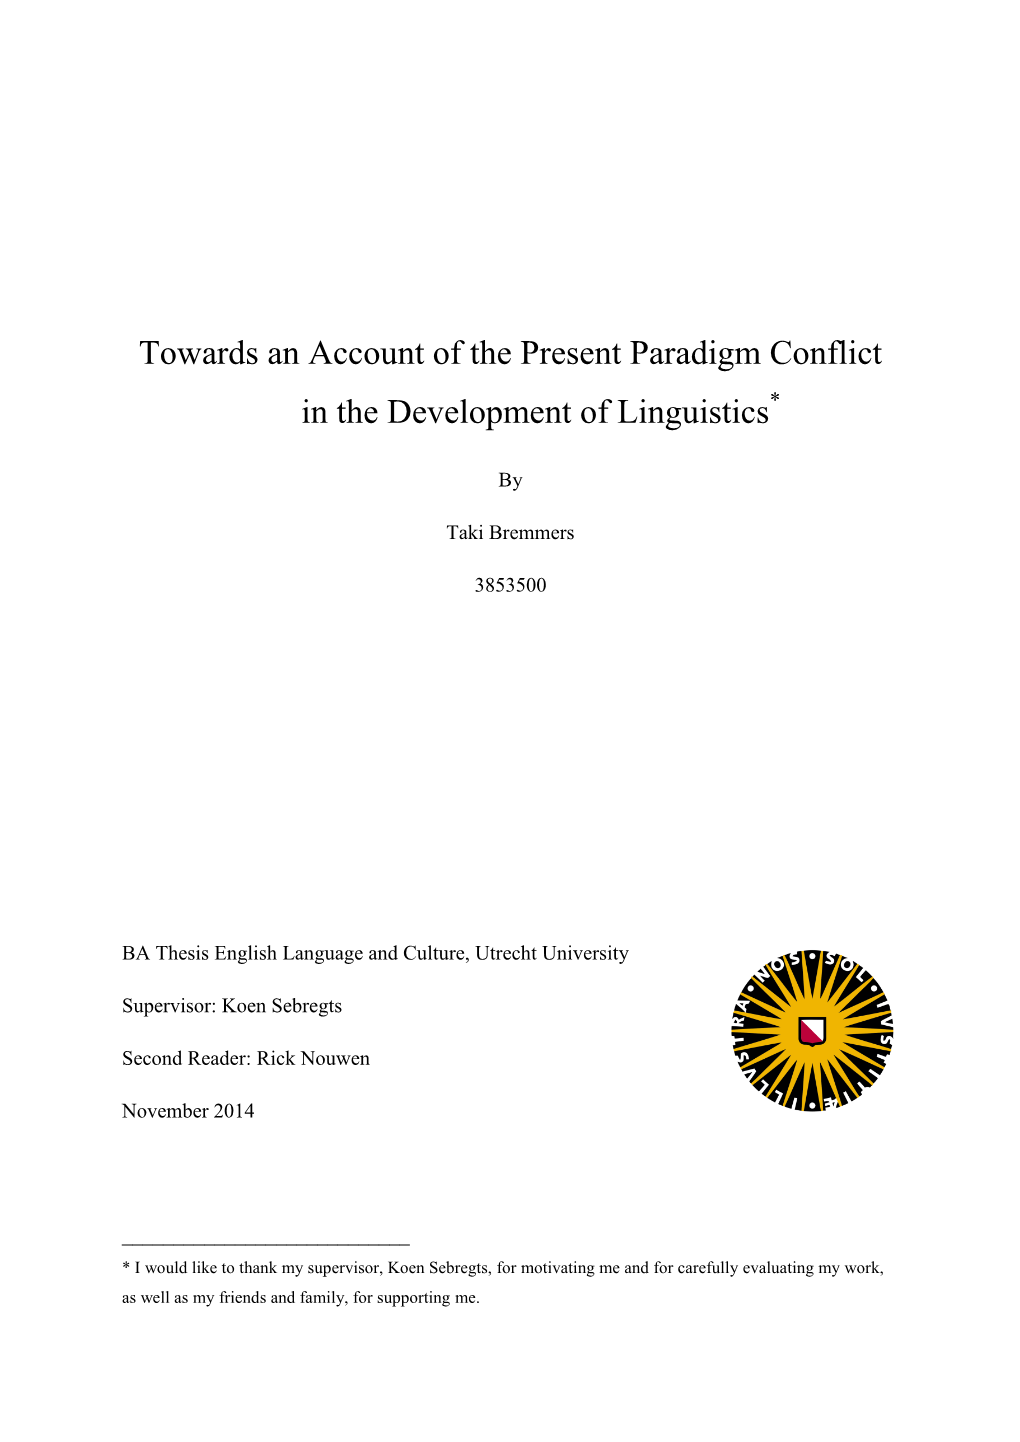 Towards an Account of the Present Paradigm Conflict in the Development of Linguistics*